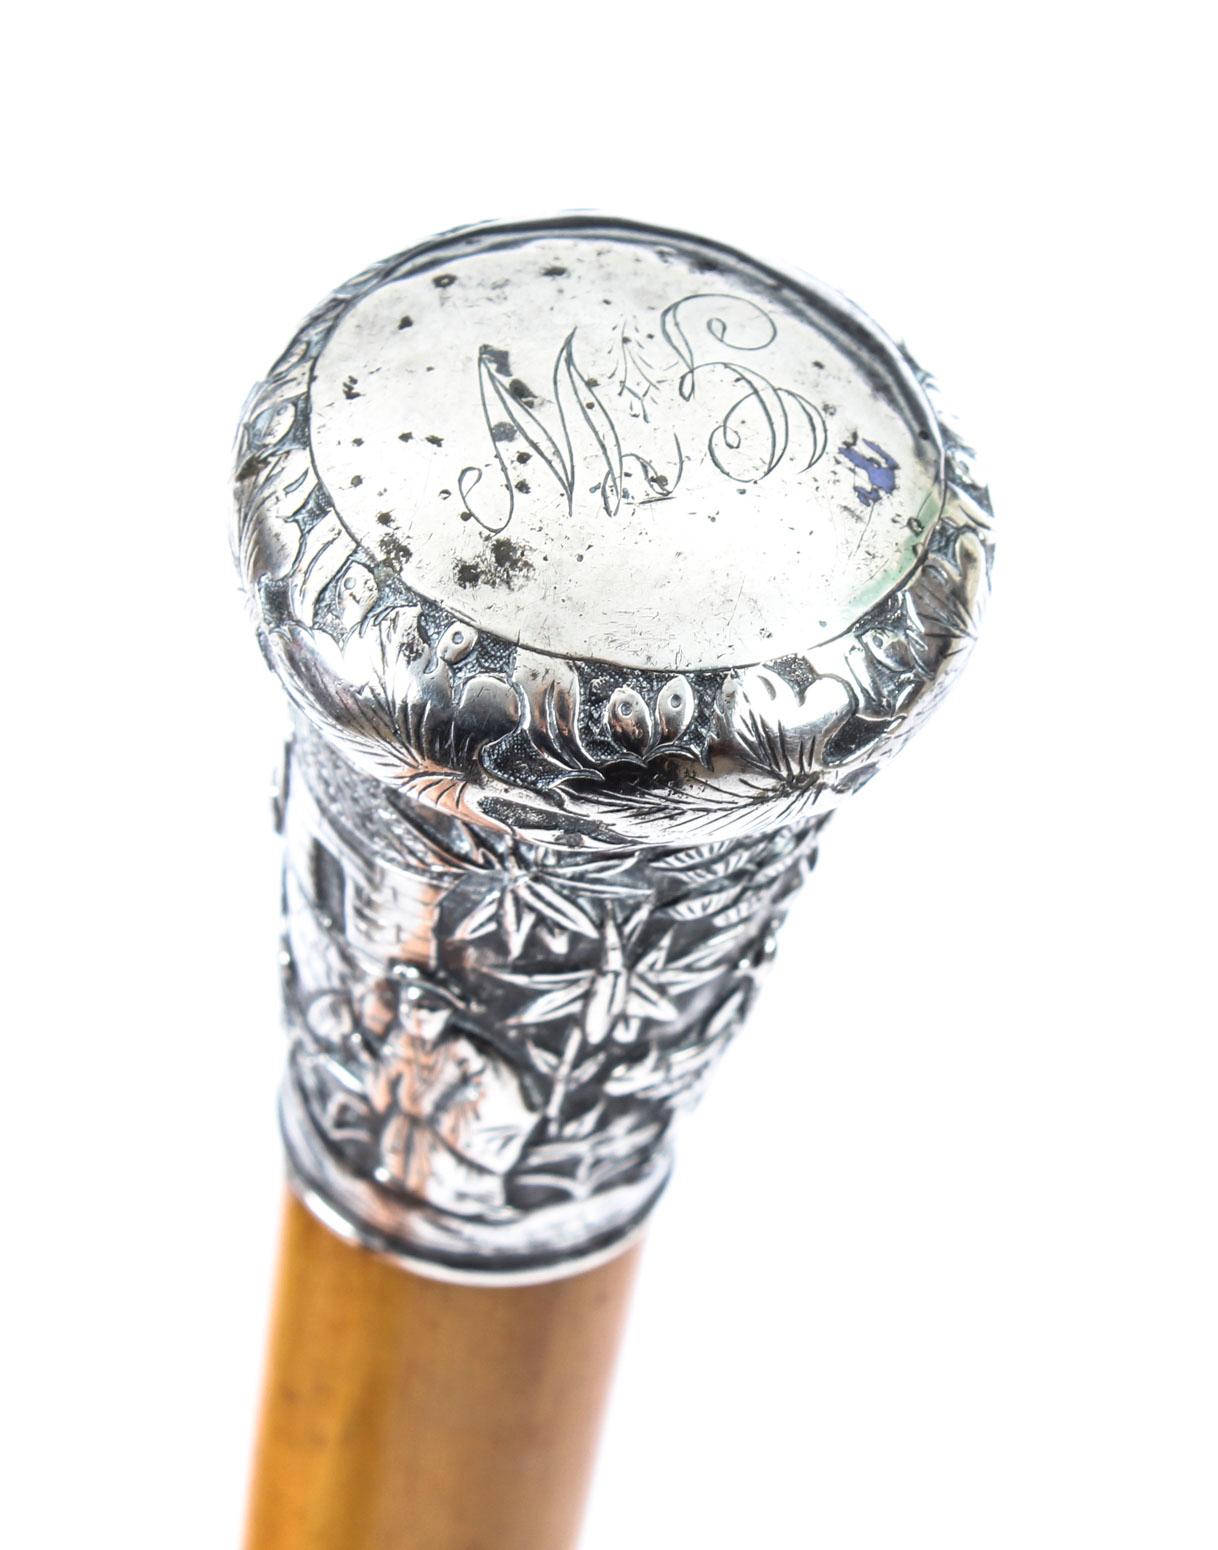 This is a beautiful antique Chinese gentleman's silver pommel walking stick, circa 1890 in date, the pommel initialled G.W..
 
It features an exquisite Chinese silver pommel decorated with immortals on clouds and figures in a wooded landscape. The